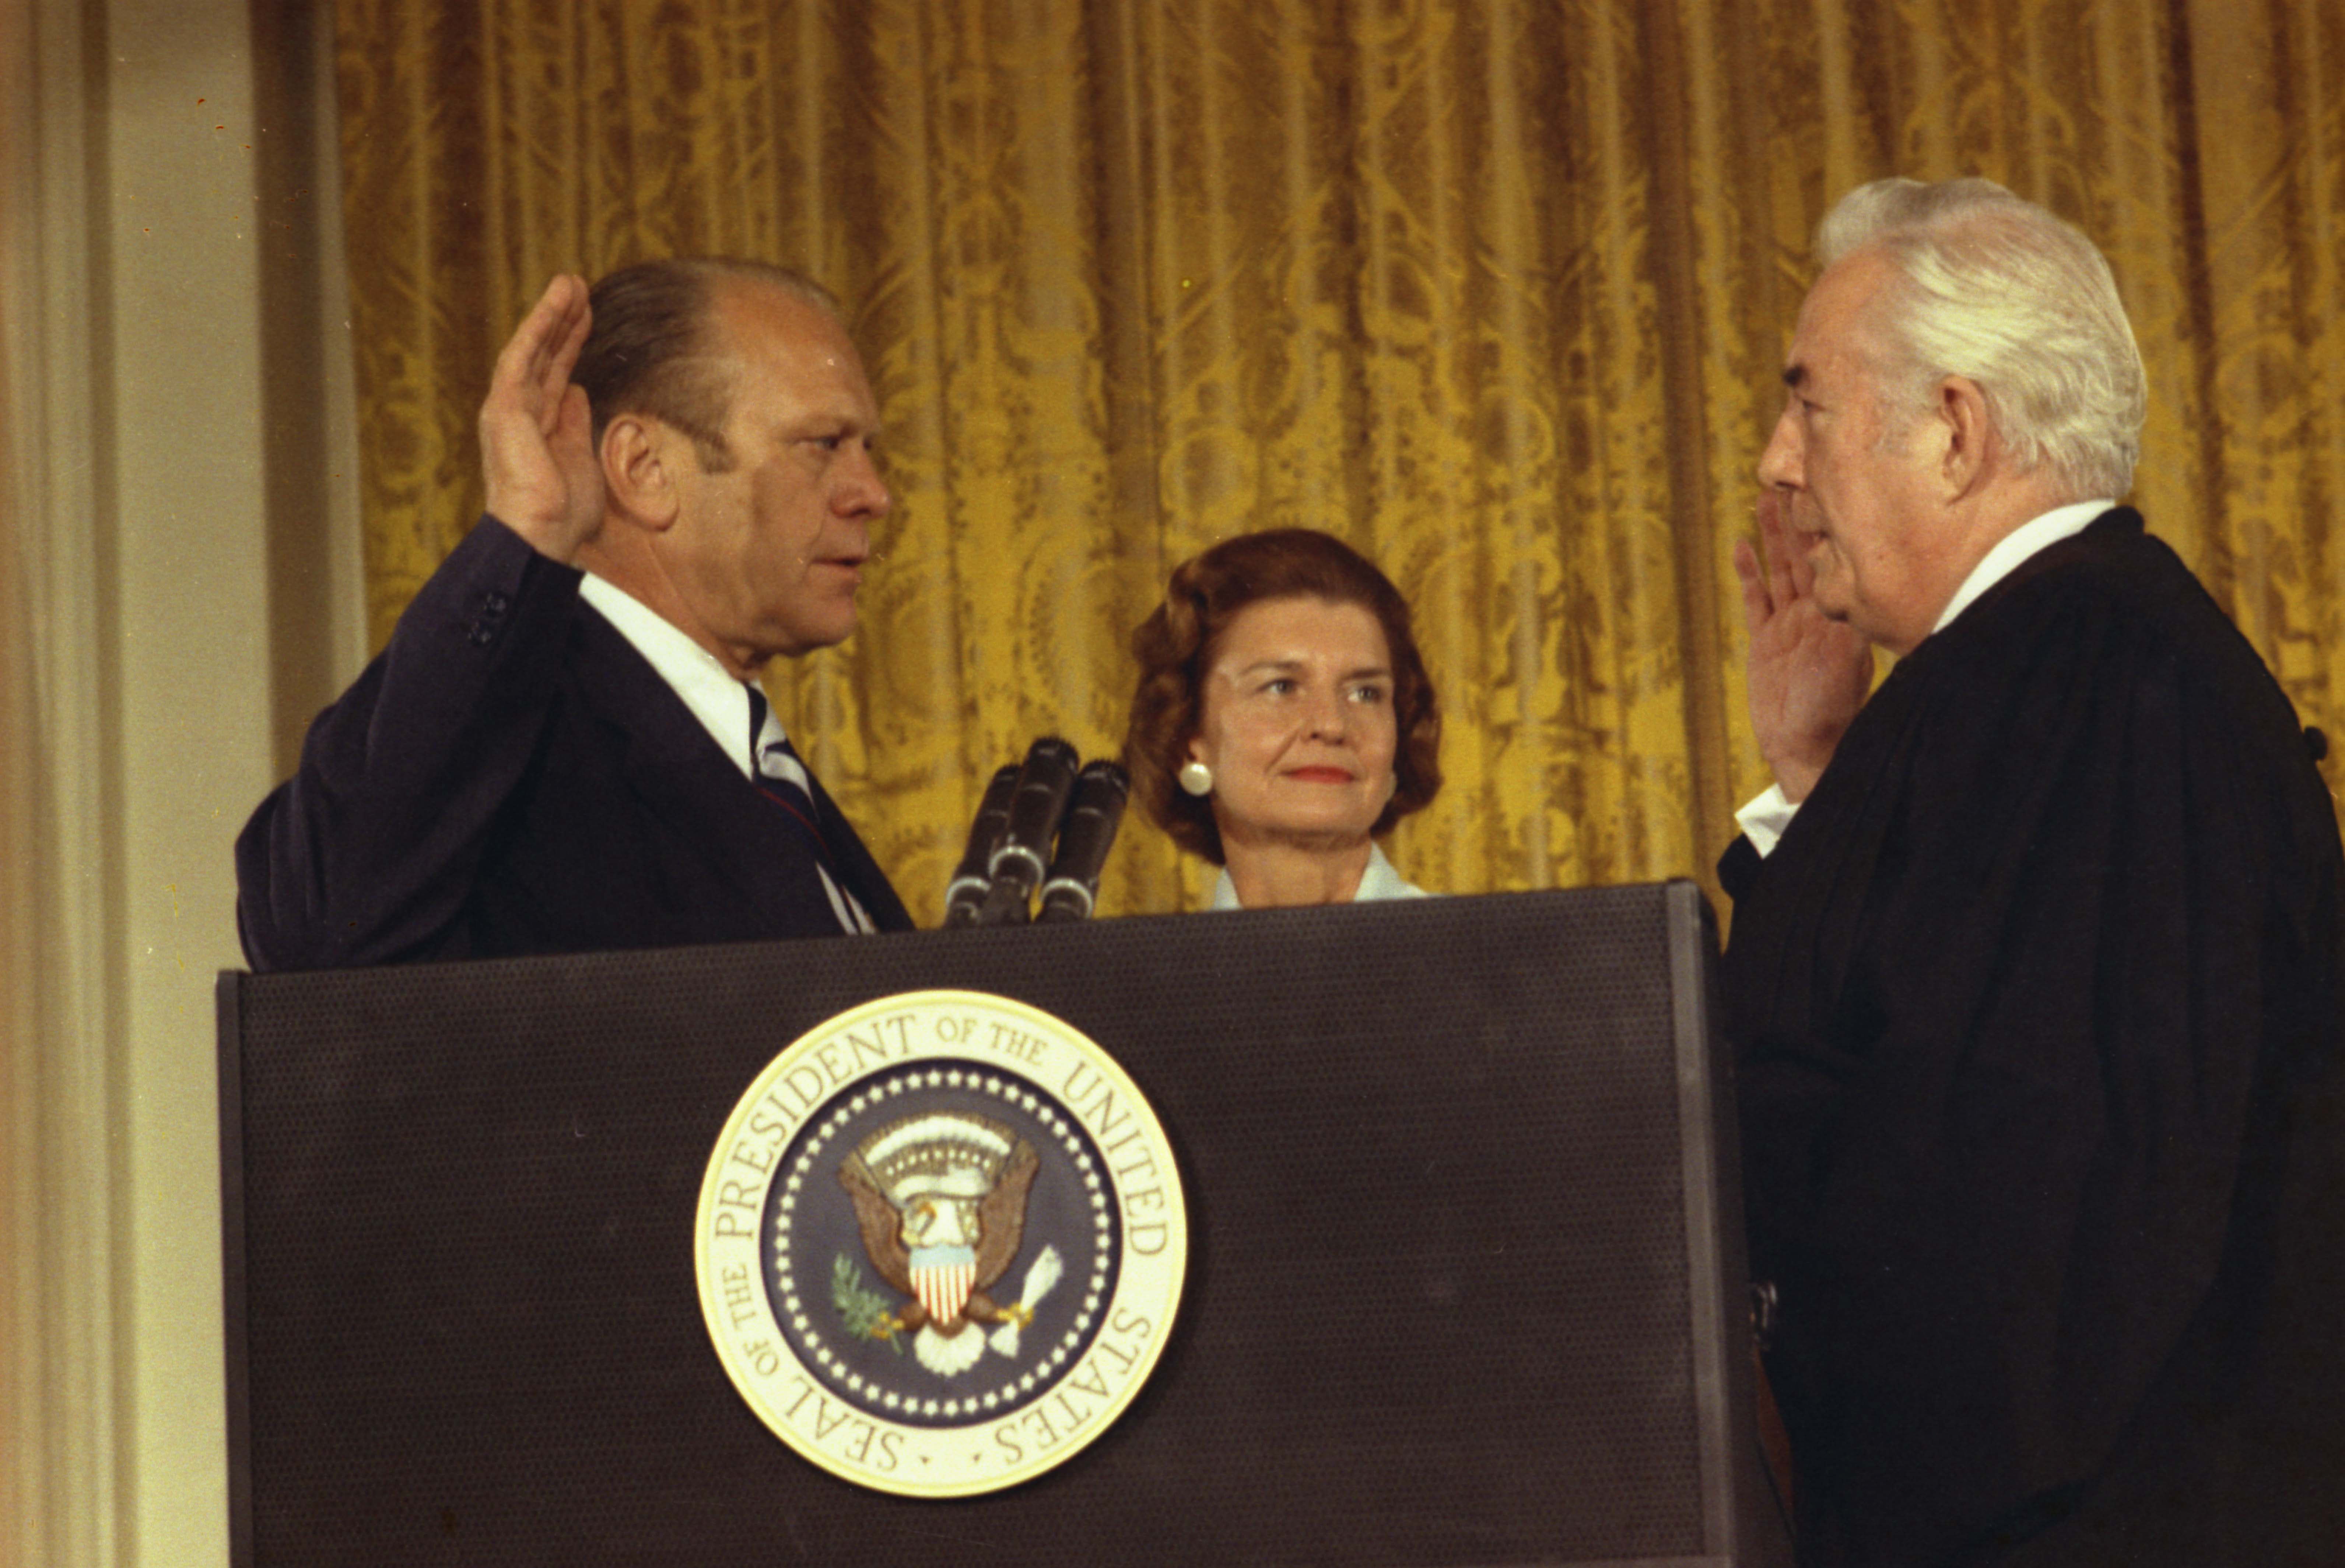 Gerald Ford sworn in as President